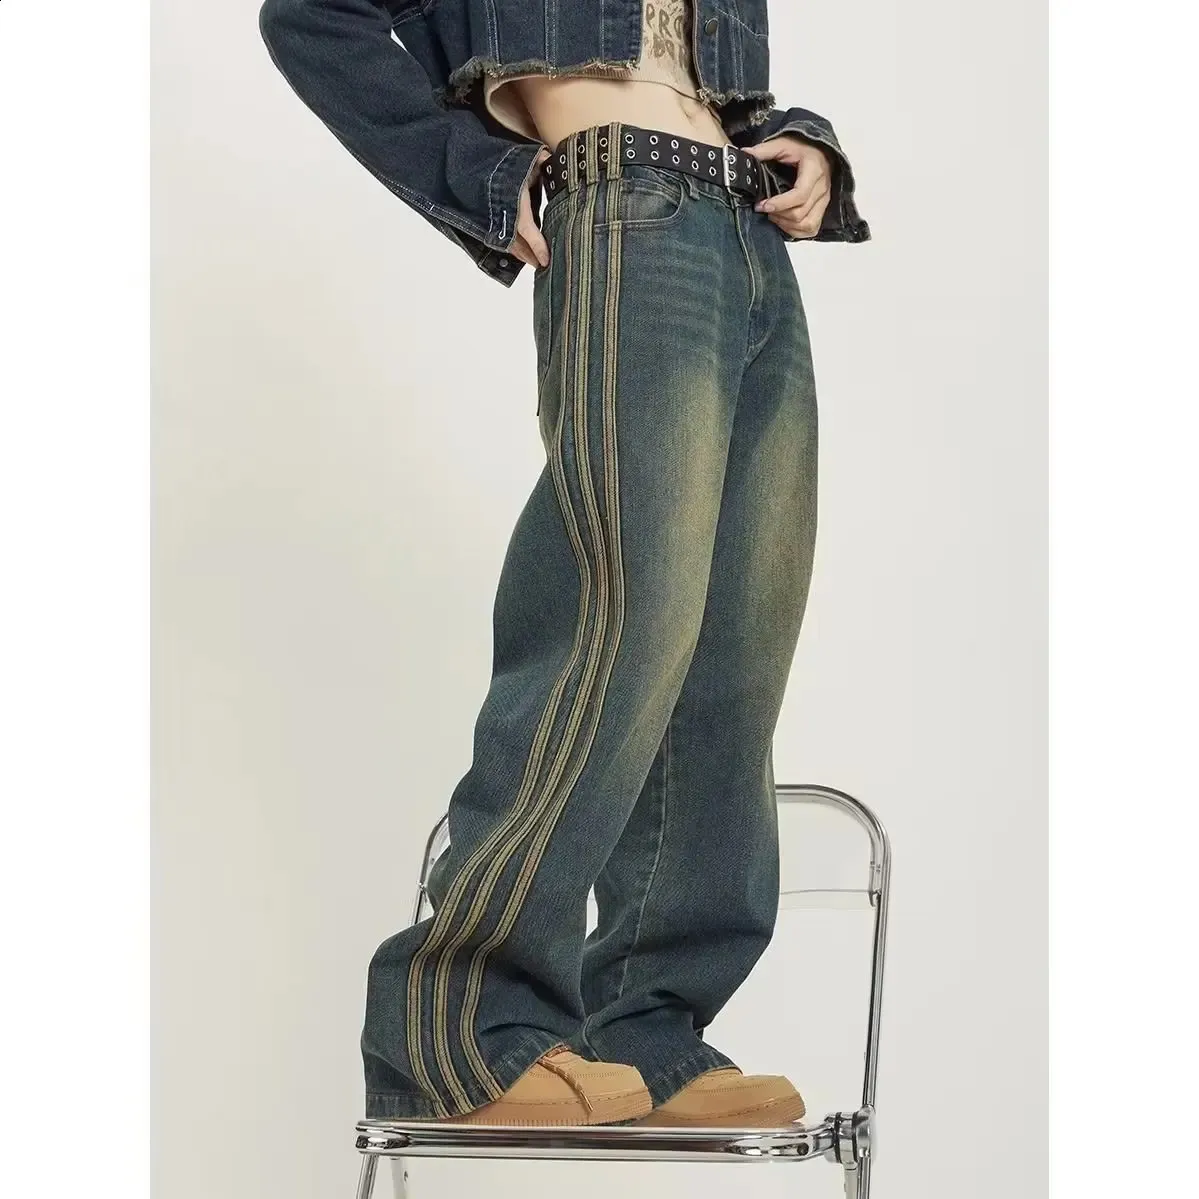 American Style Retro Wash om Old Side Striped Baggy Jeans Fashion High Street Casual Micro-Trumpet Mop High Taille Pant Gothic 240329 te doen